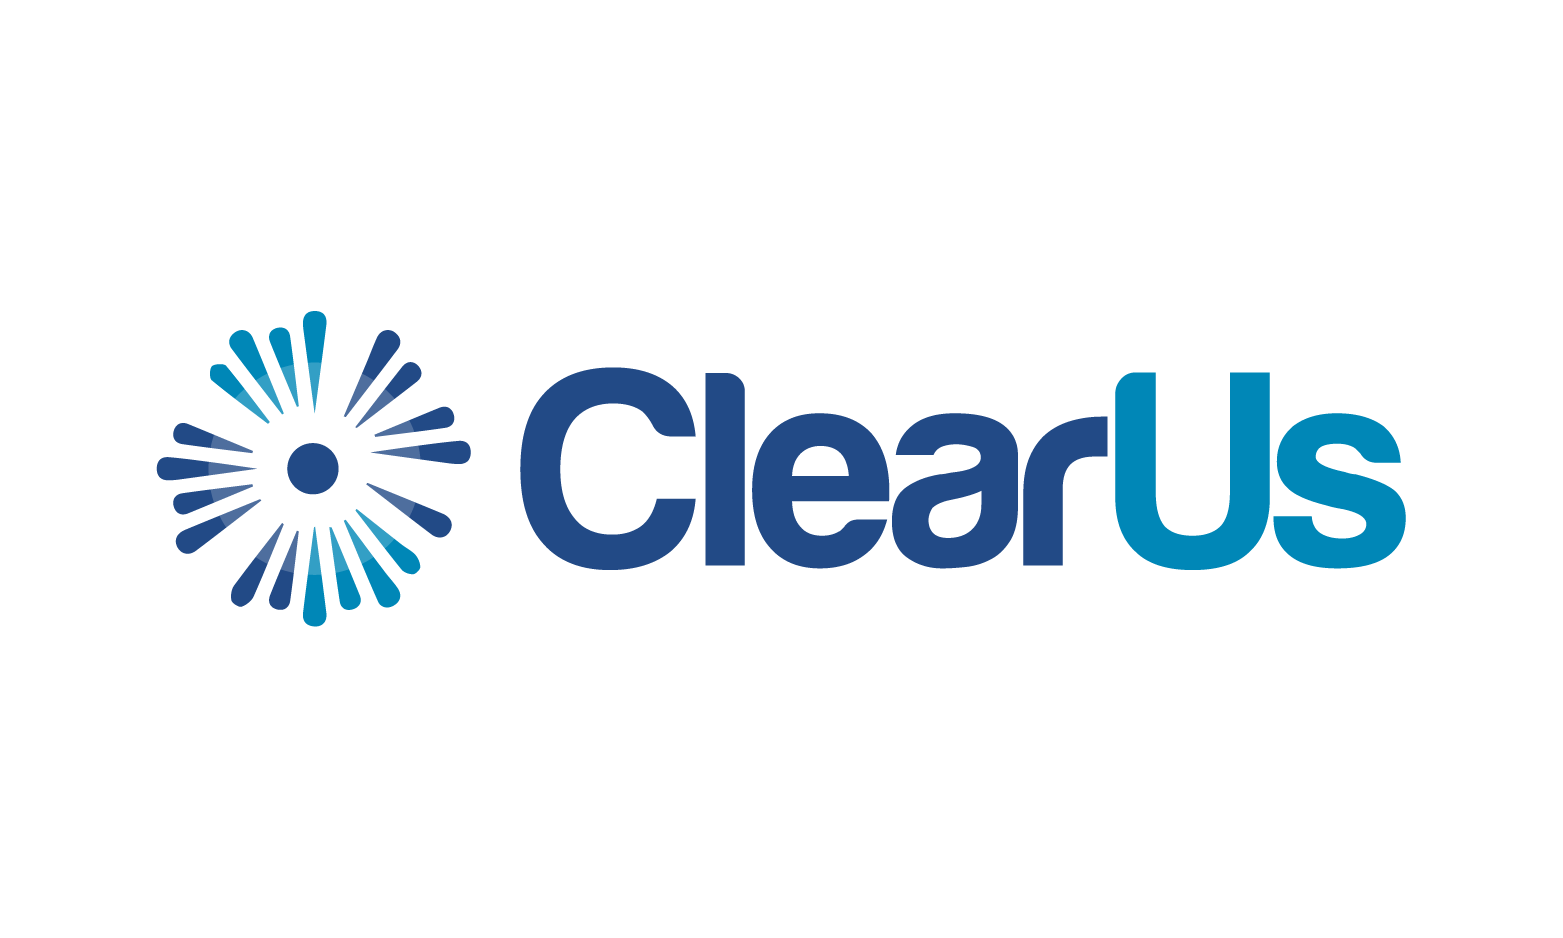 ClearUs.com - Creative brandable domain for sale